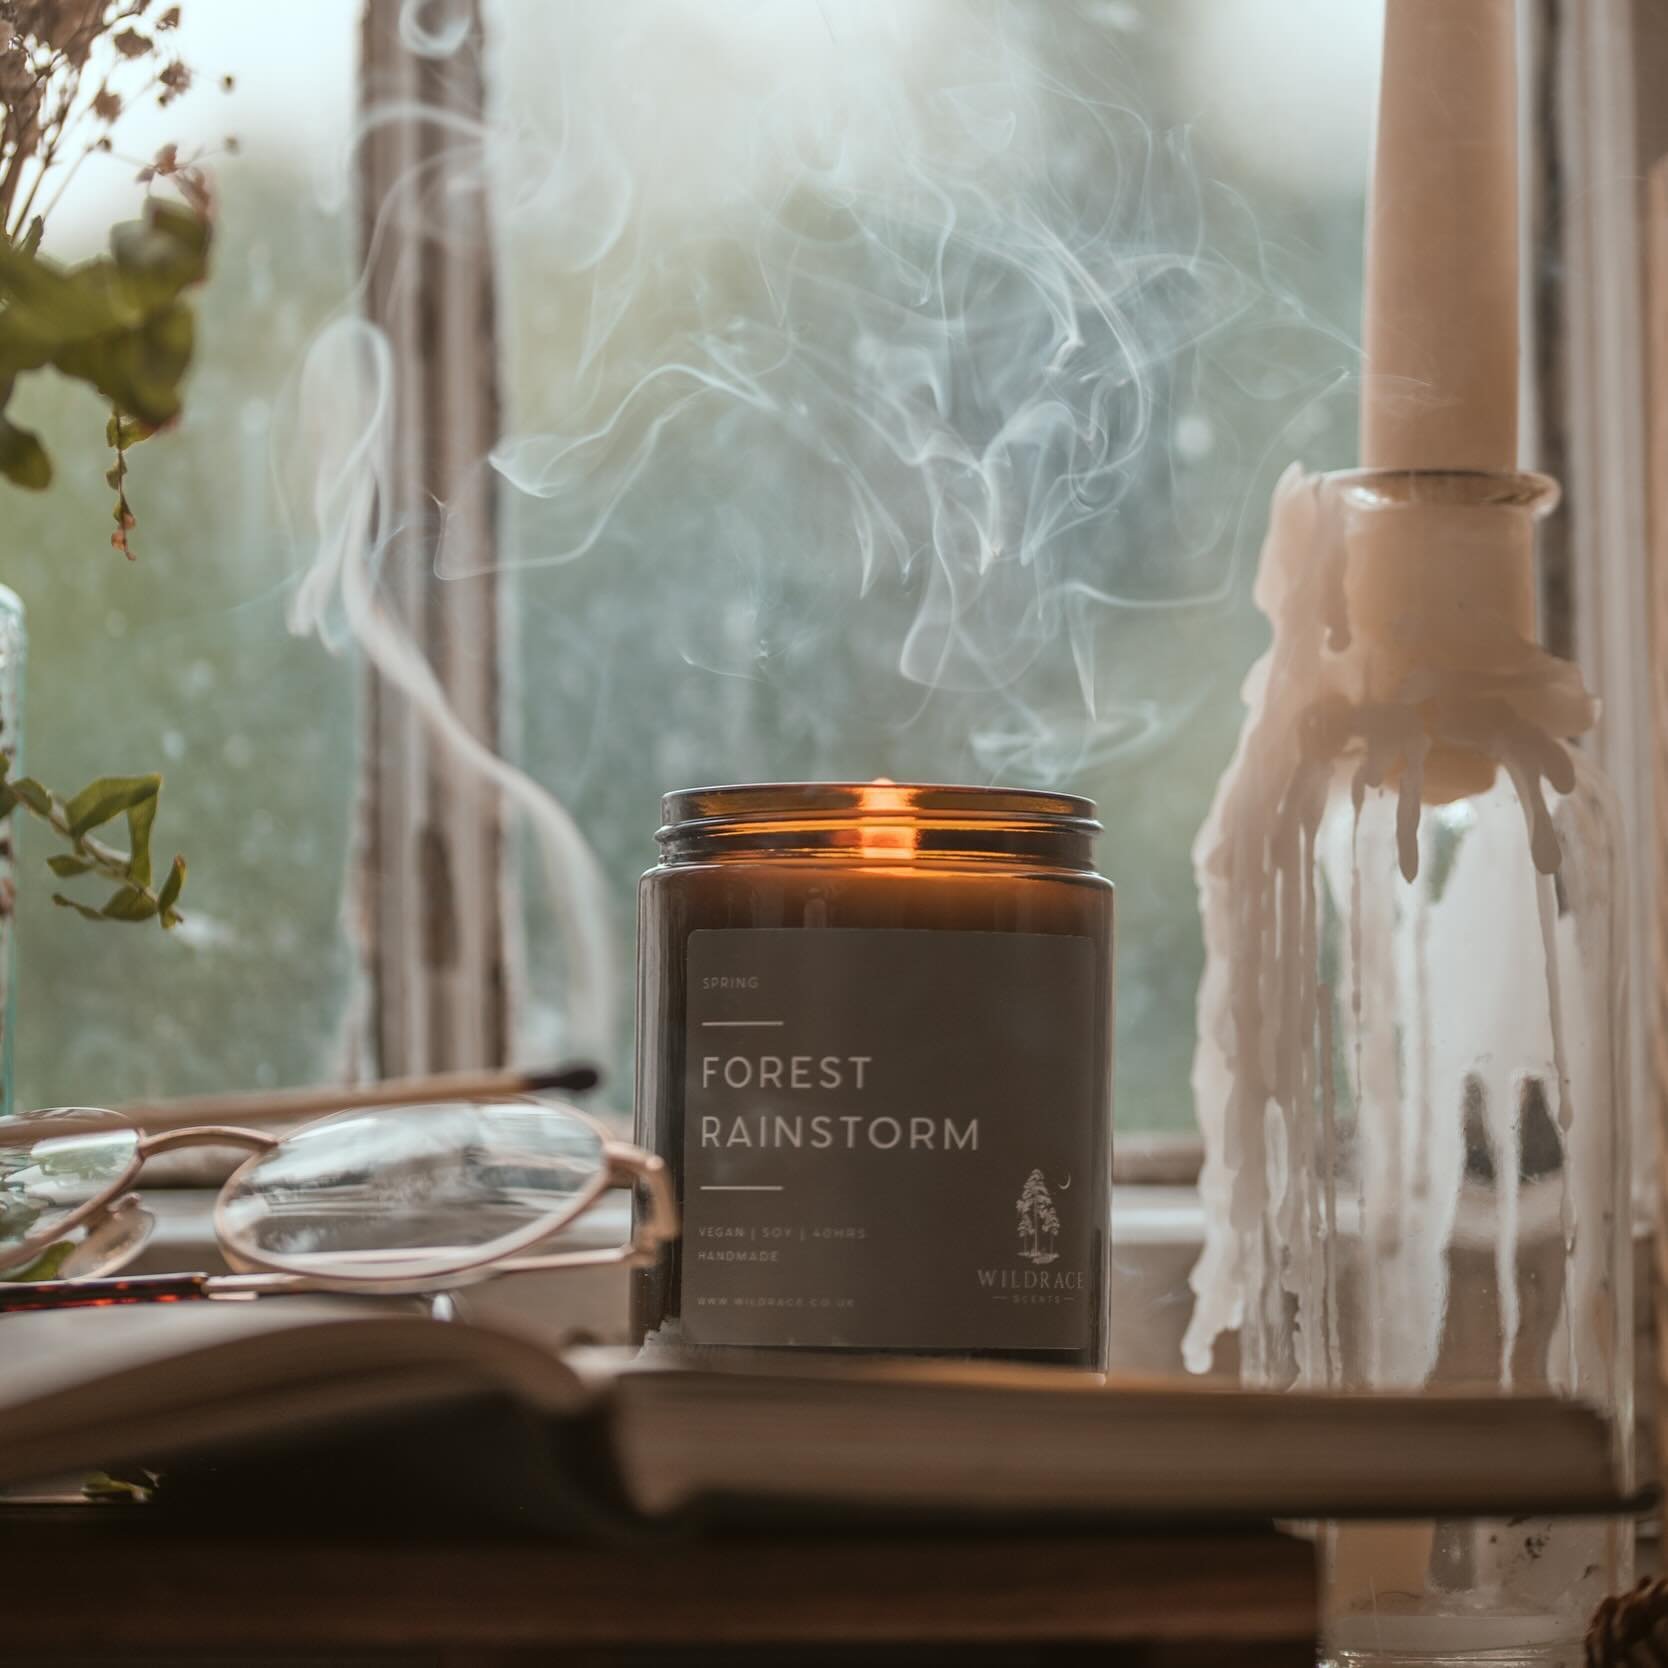 Love this shot of our very popular Forest Rainstorm candle 🌲 🌧️ 

This candle brings in so many of you and it&rsquo;s genuinely hard to find people that haven&rsquo;t tried Forest Rainstorm&hellip; have you? 

#raincandle #petrichor #wildrace #cand